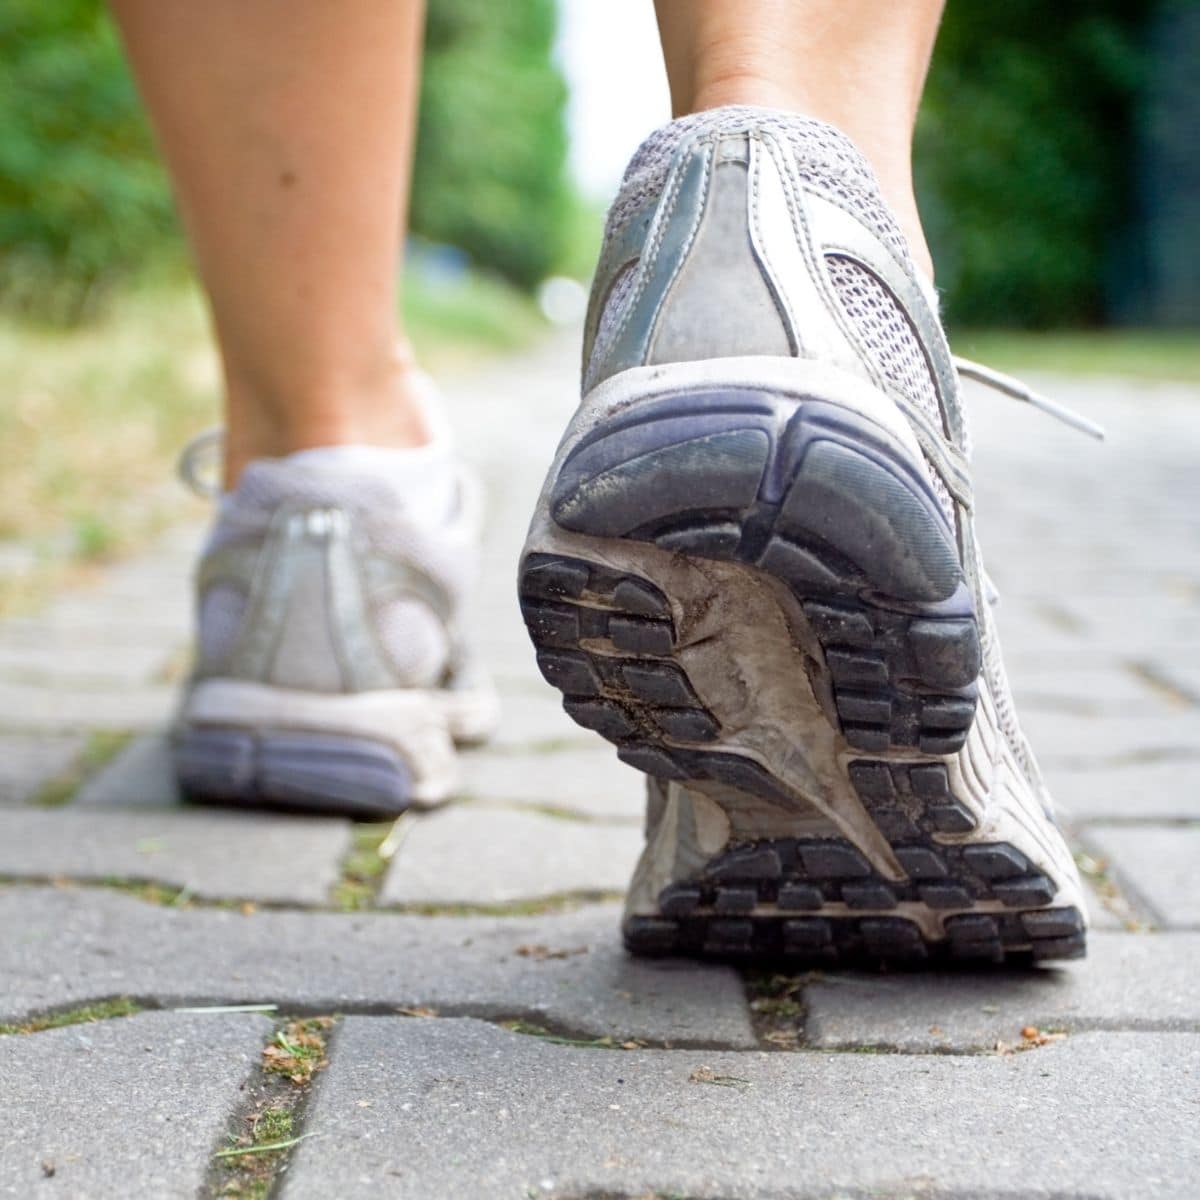 Benefits of Walking for Exercise